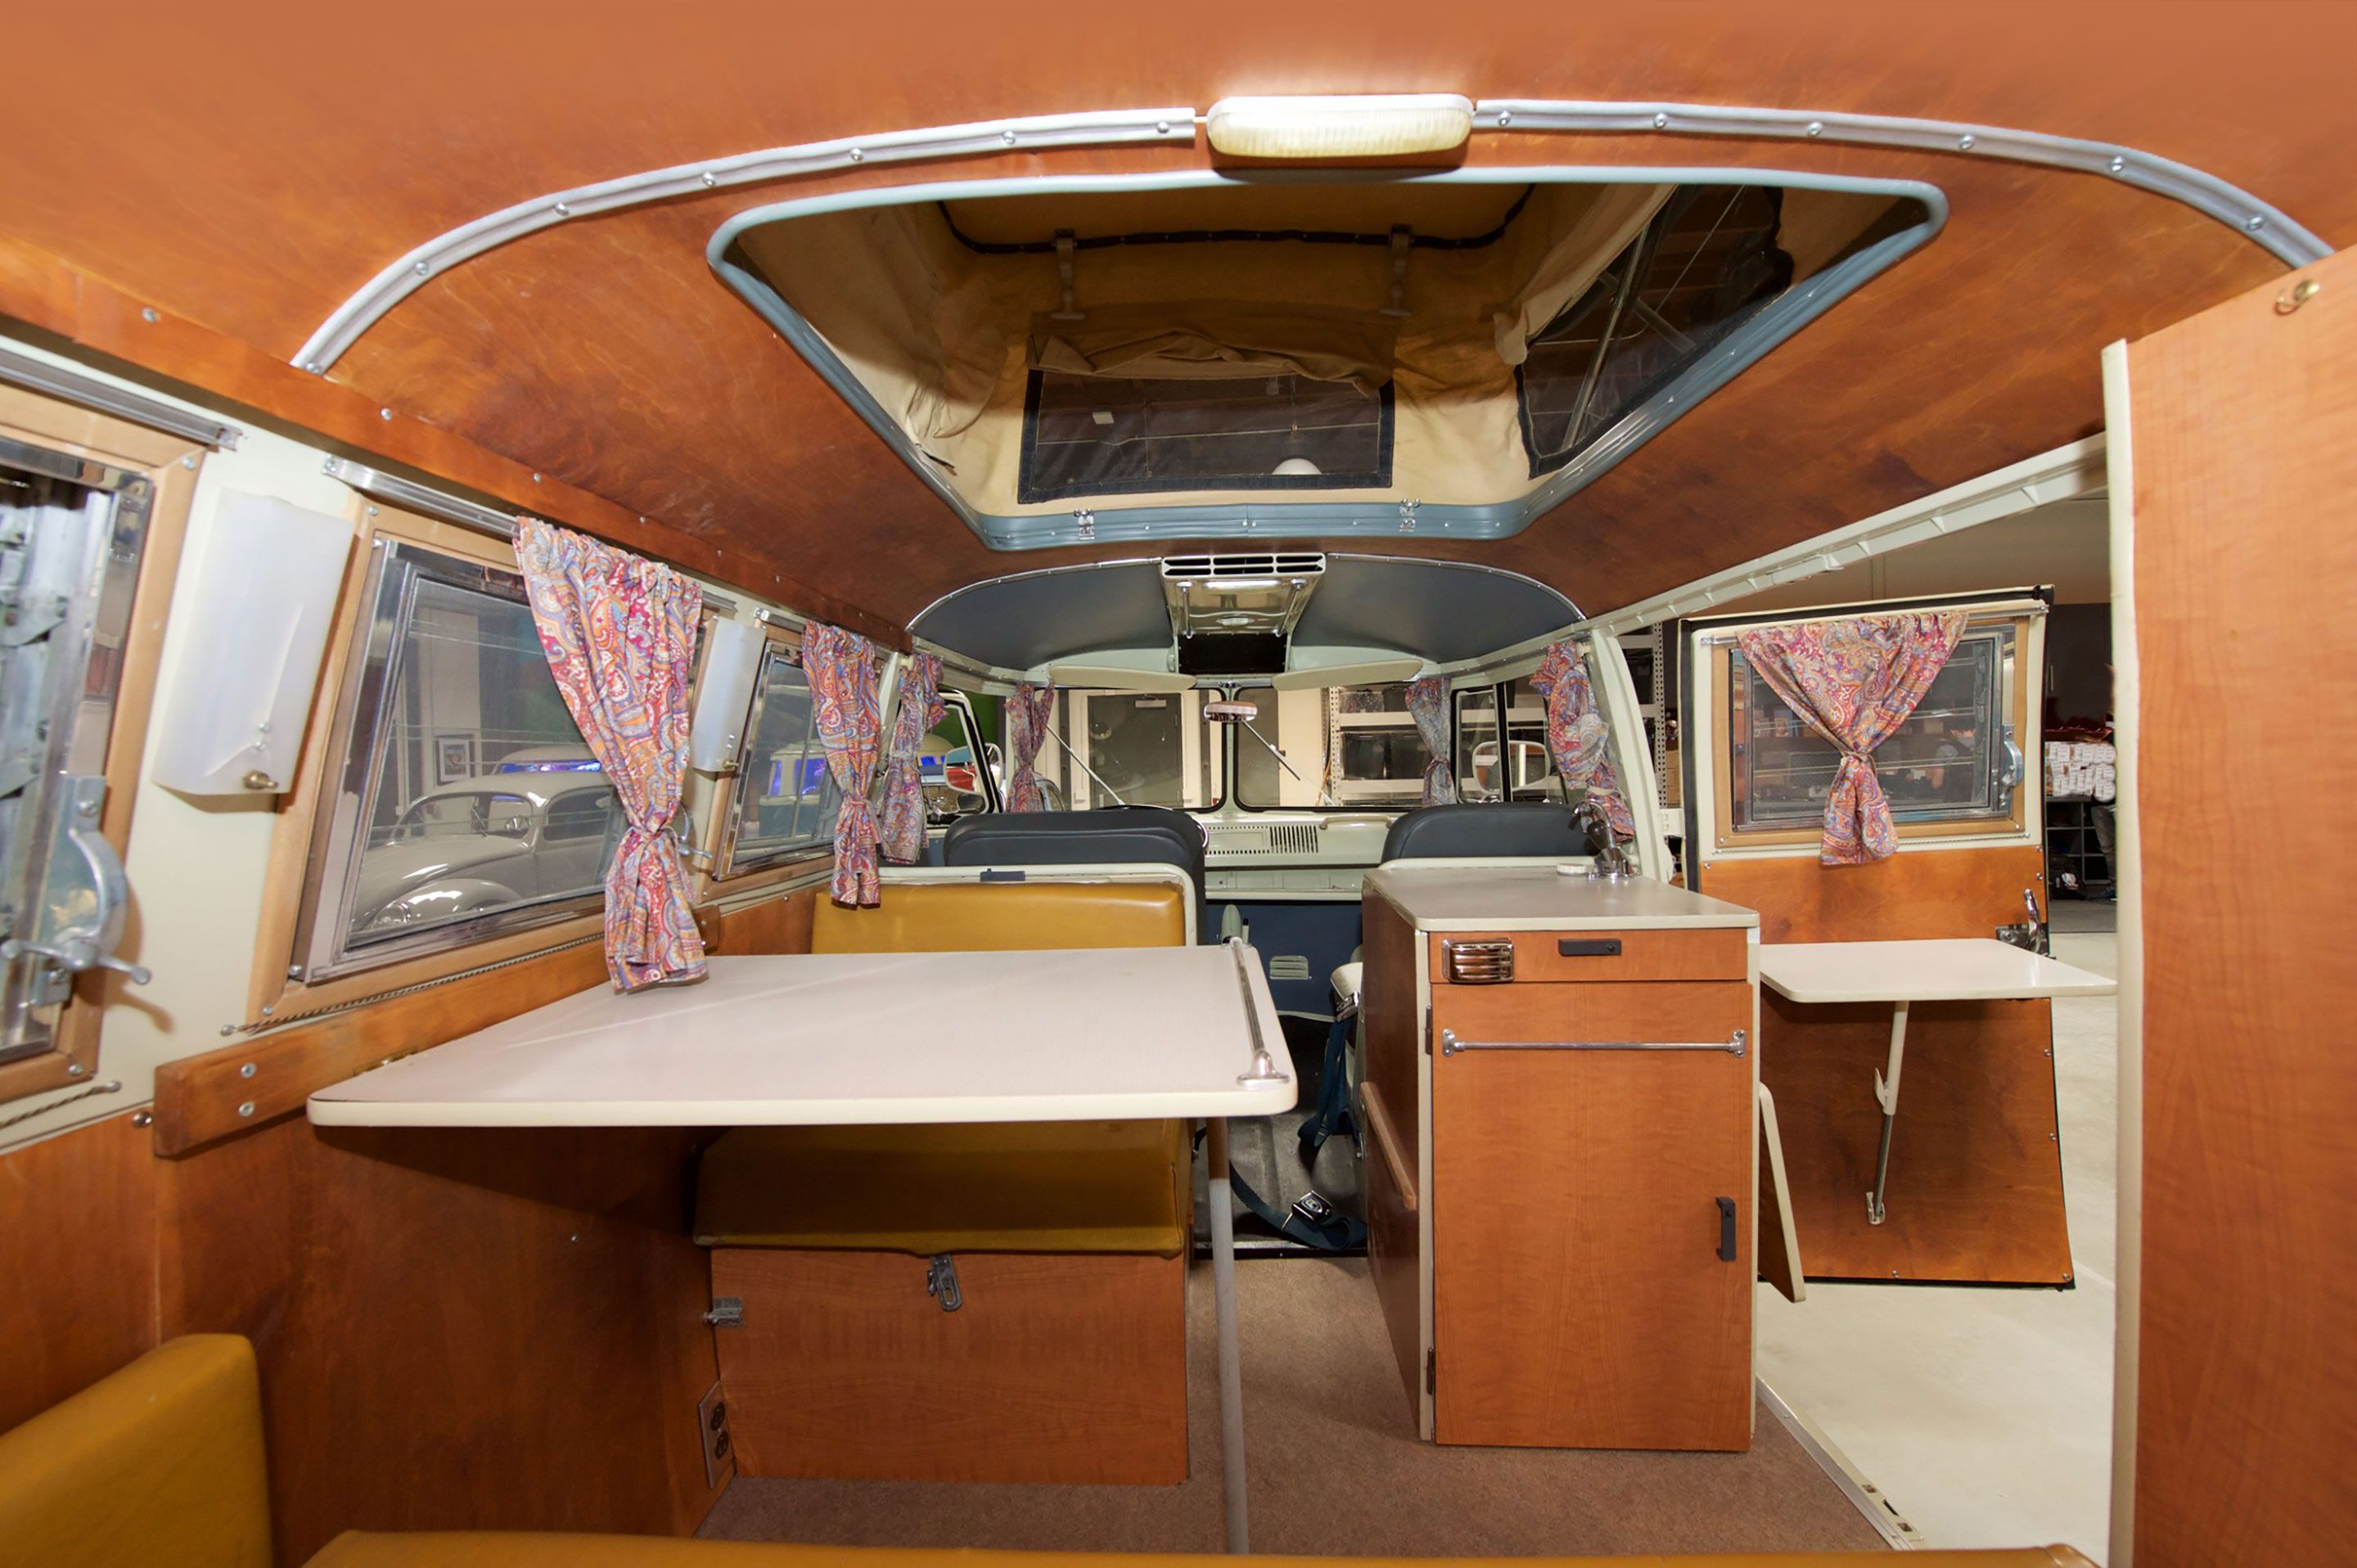 Interior view of VW bus